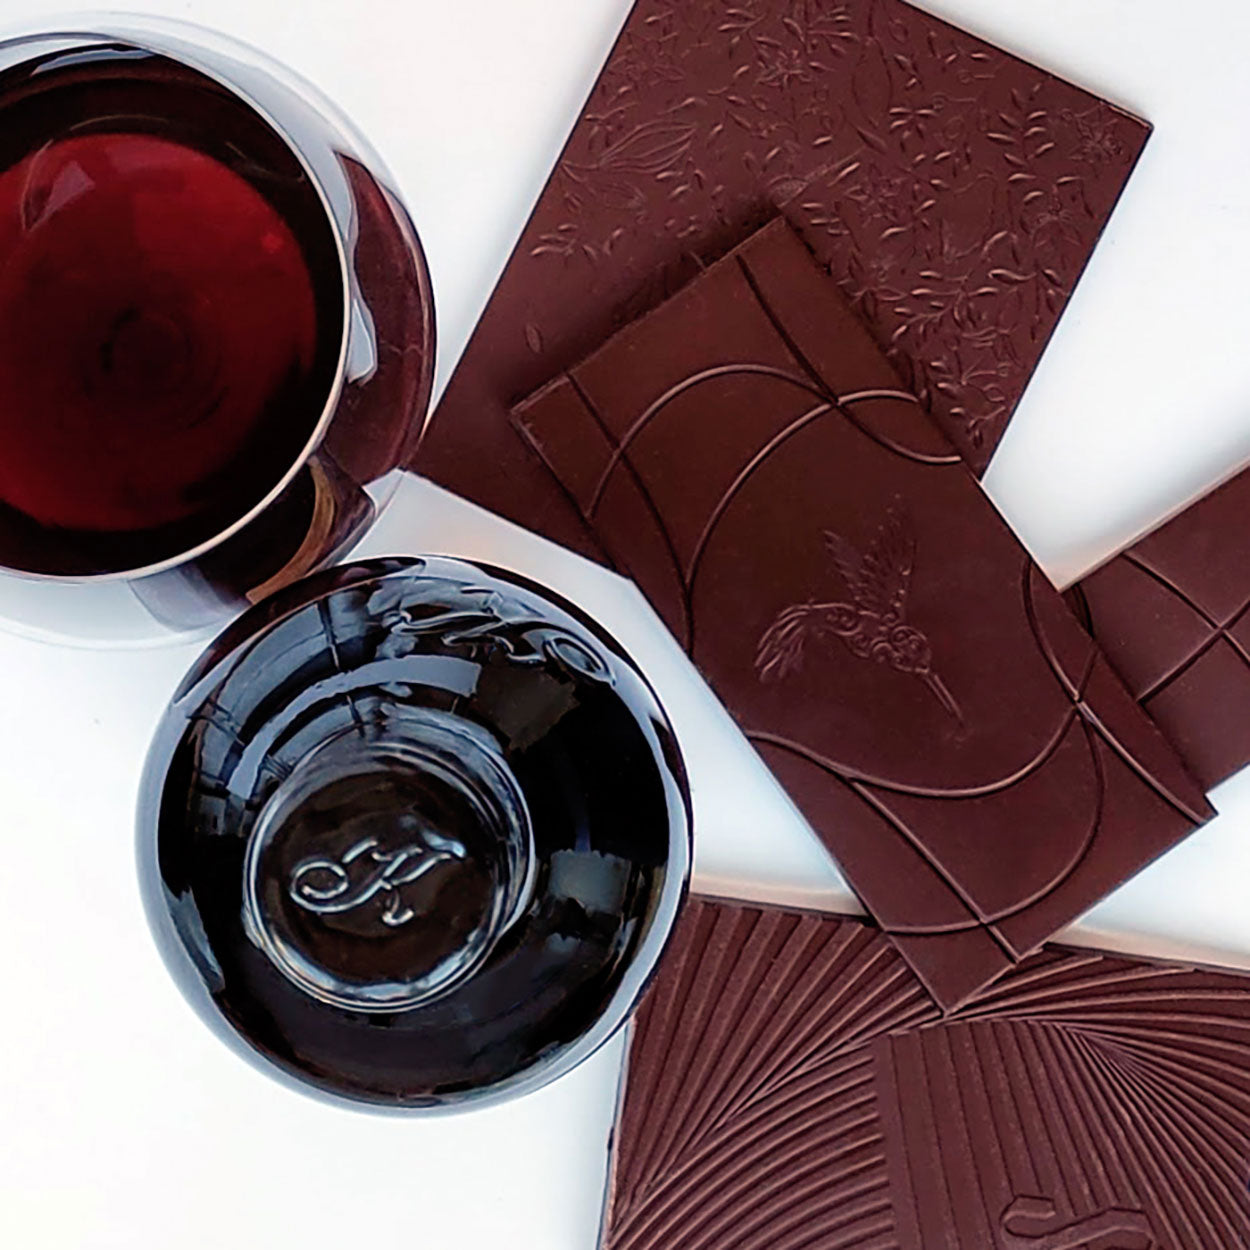 pairing 4 bean to bar chocolate bars with red wine